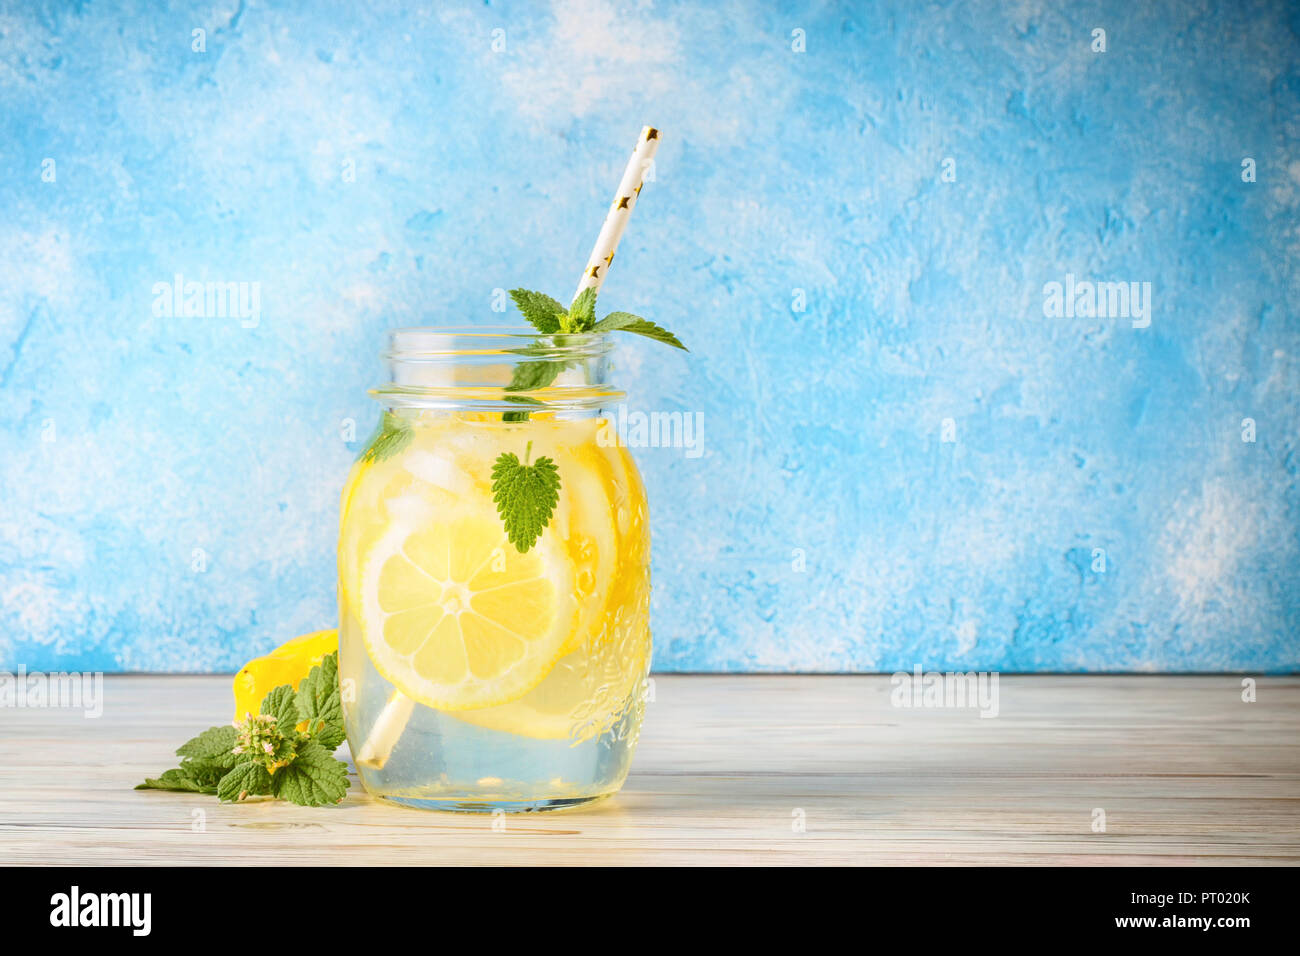 Coctail jar of lemonade and mint leaves on wooden table blue background Natural lemon water homemade food is popular detox beverage Glass of antioxidant infusion. Stock Photo